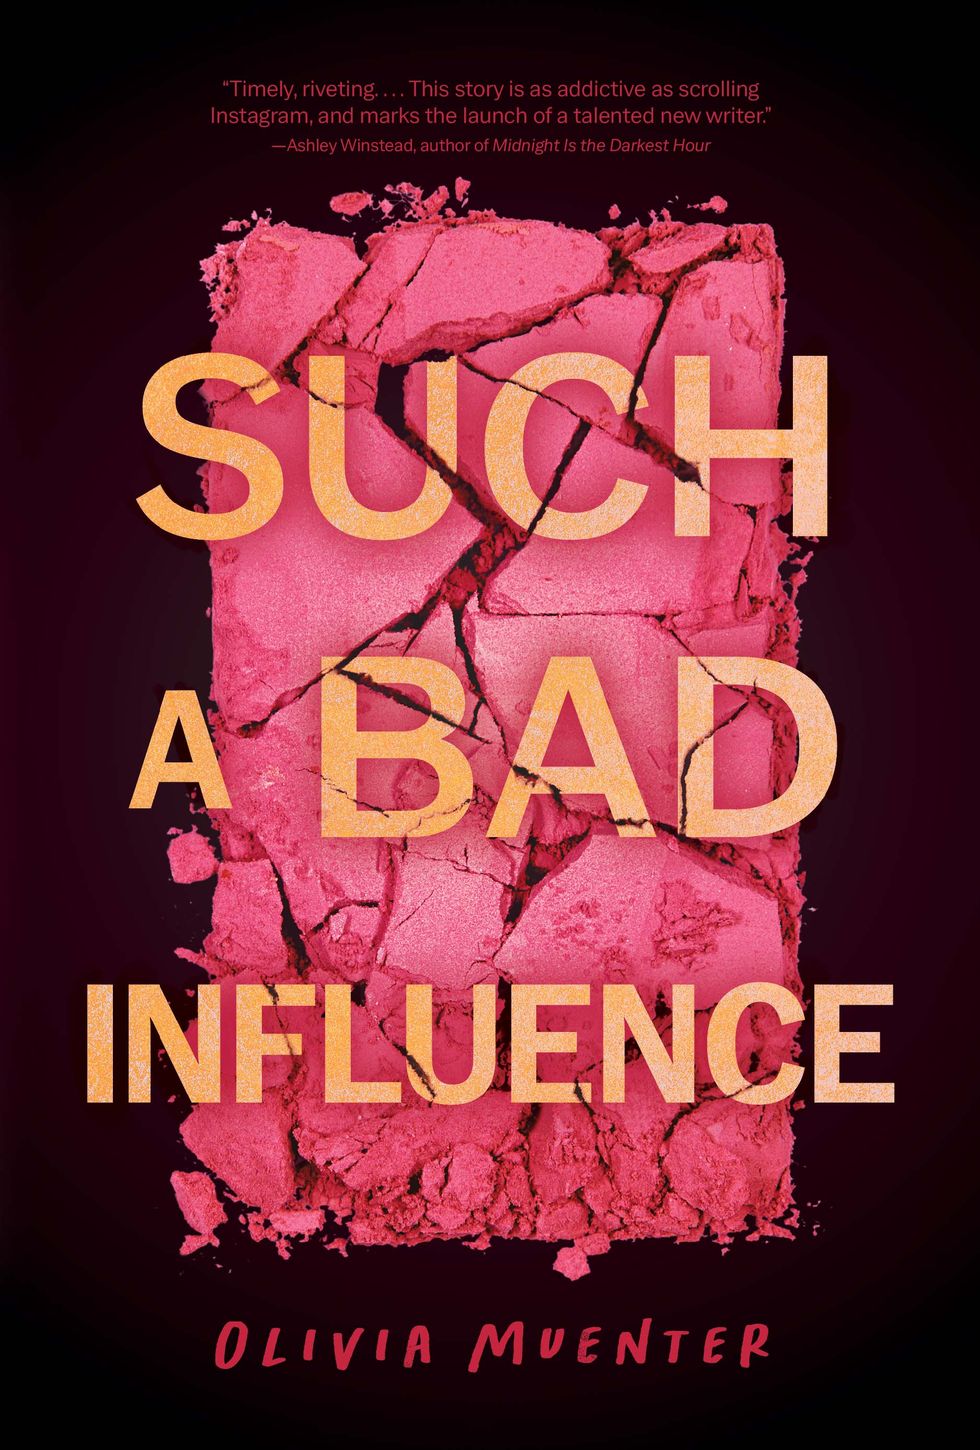 Read ‘Such a Bad Influence’ by Olivia Muenter Book Excerpt, See Cover ...